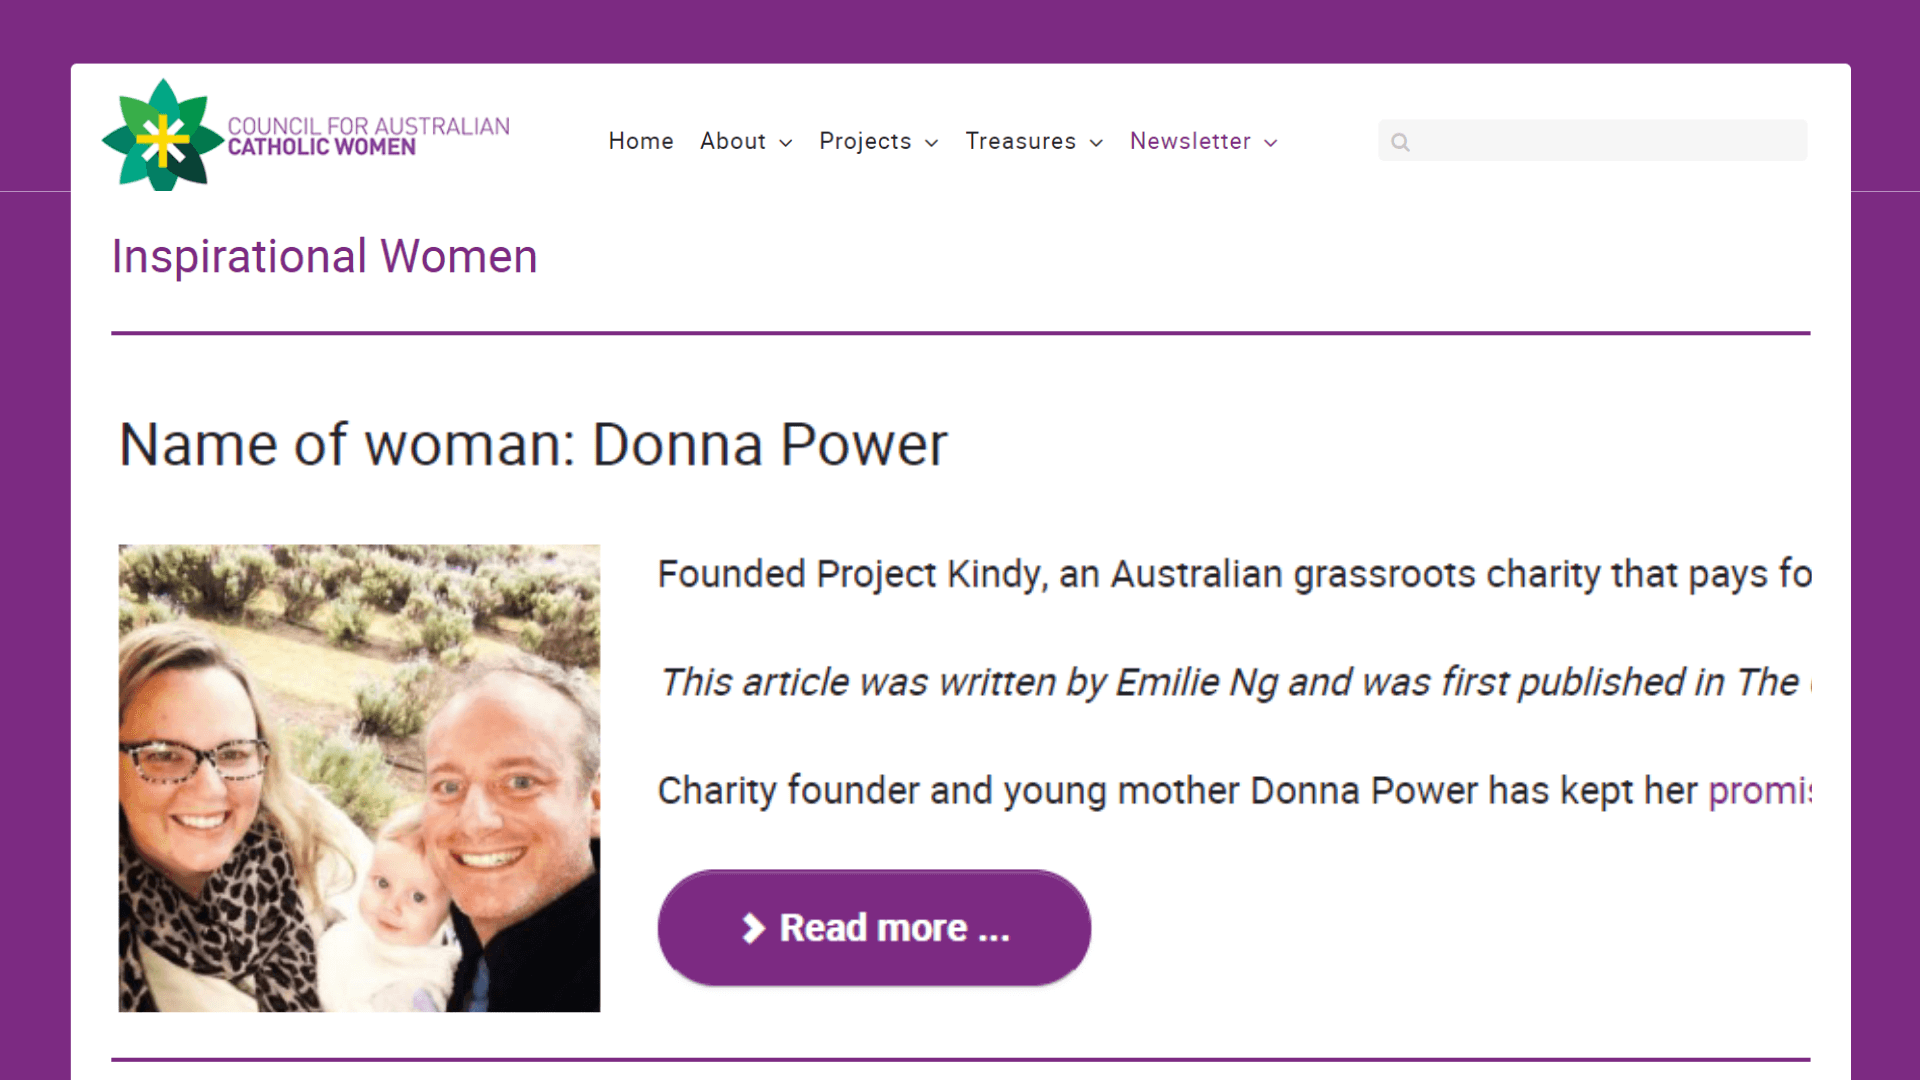 Donna Power from Experience Wellbeing Catholic school retreat facilitator in the Brisbane Catholic Archiocese article on Project Kindy by council for australian catholic women